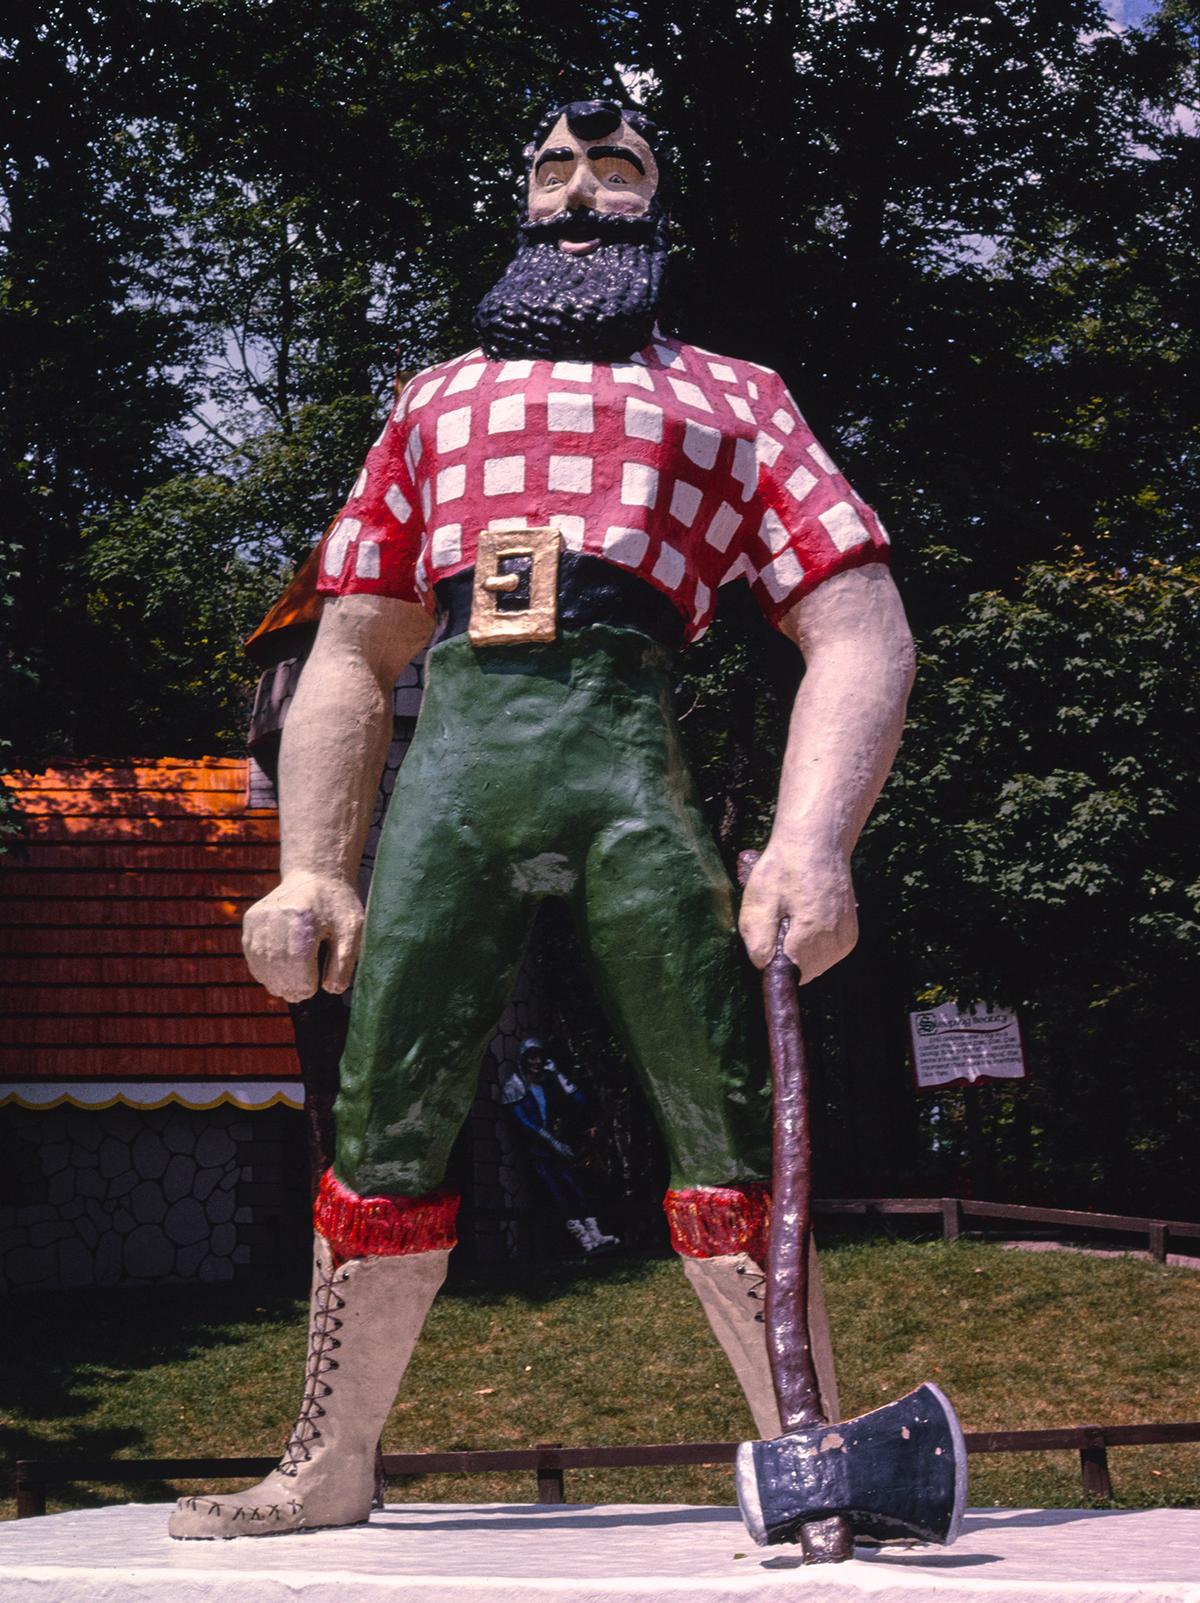 Paul Bunyan statue at the Enchanted Forest in Old Forge, New York. Library of Congress. (Public Domain)